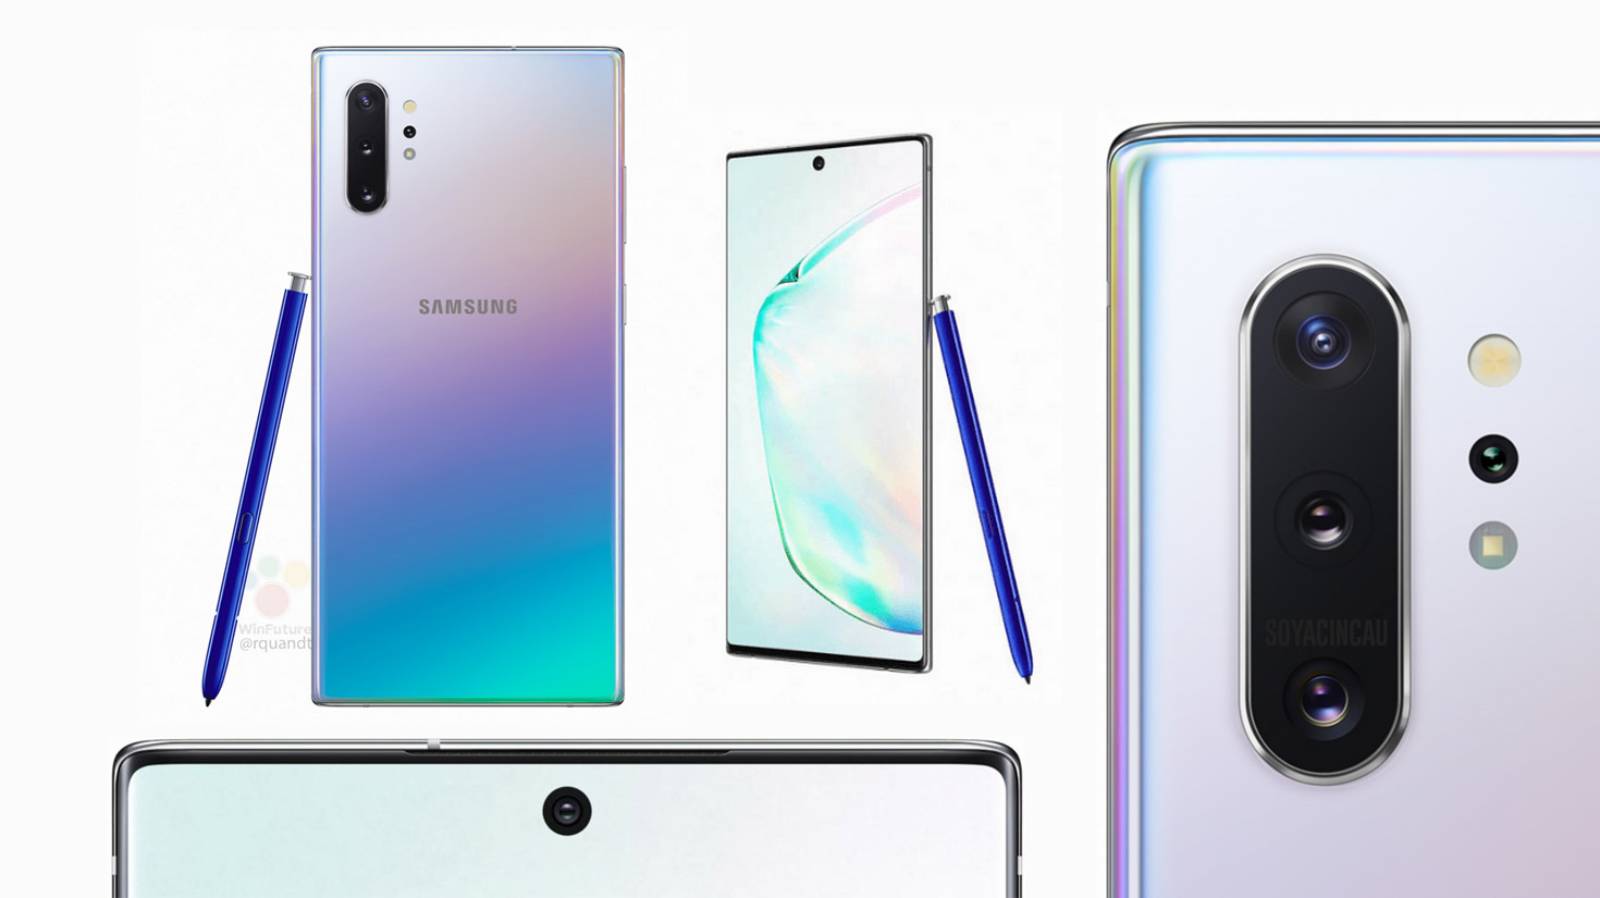 Samsung GALAXY NOTE 10 Plus AMAZING RECORD for Screen edges